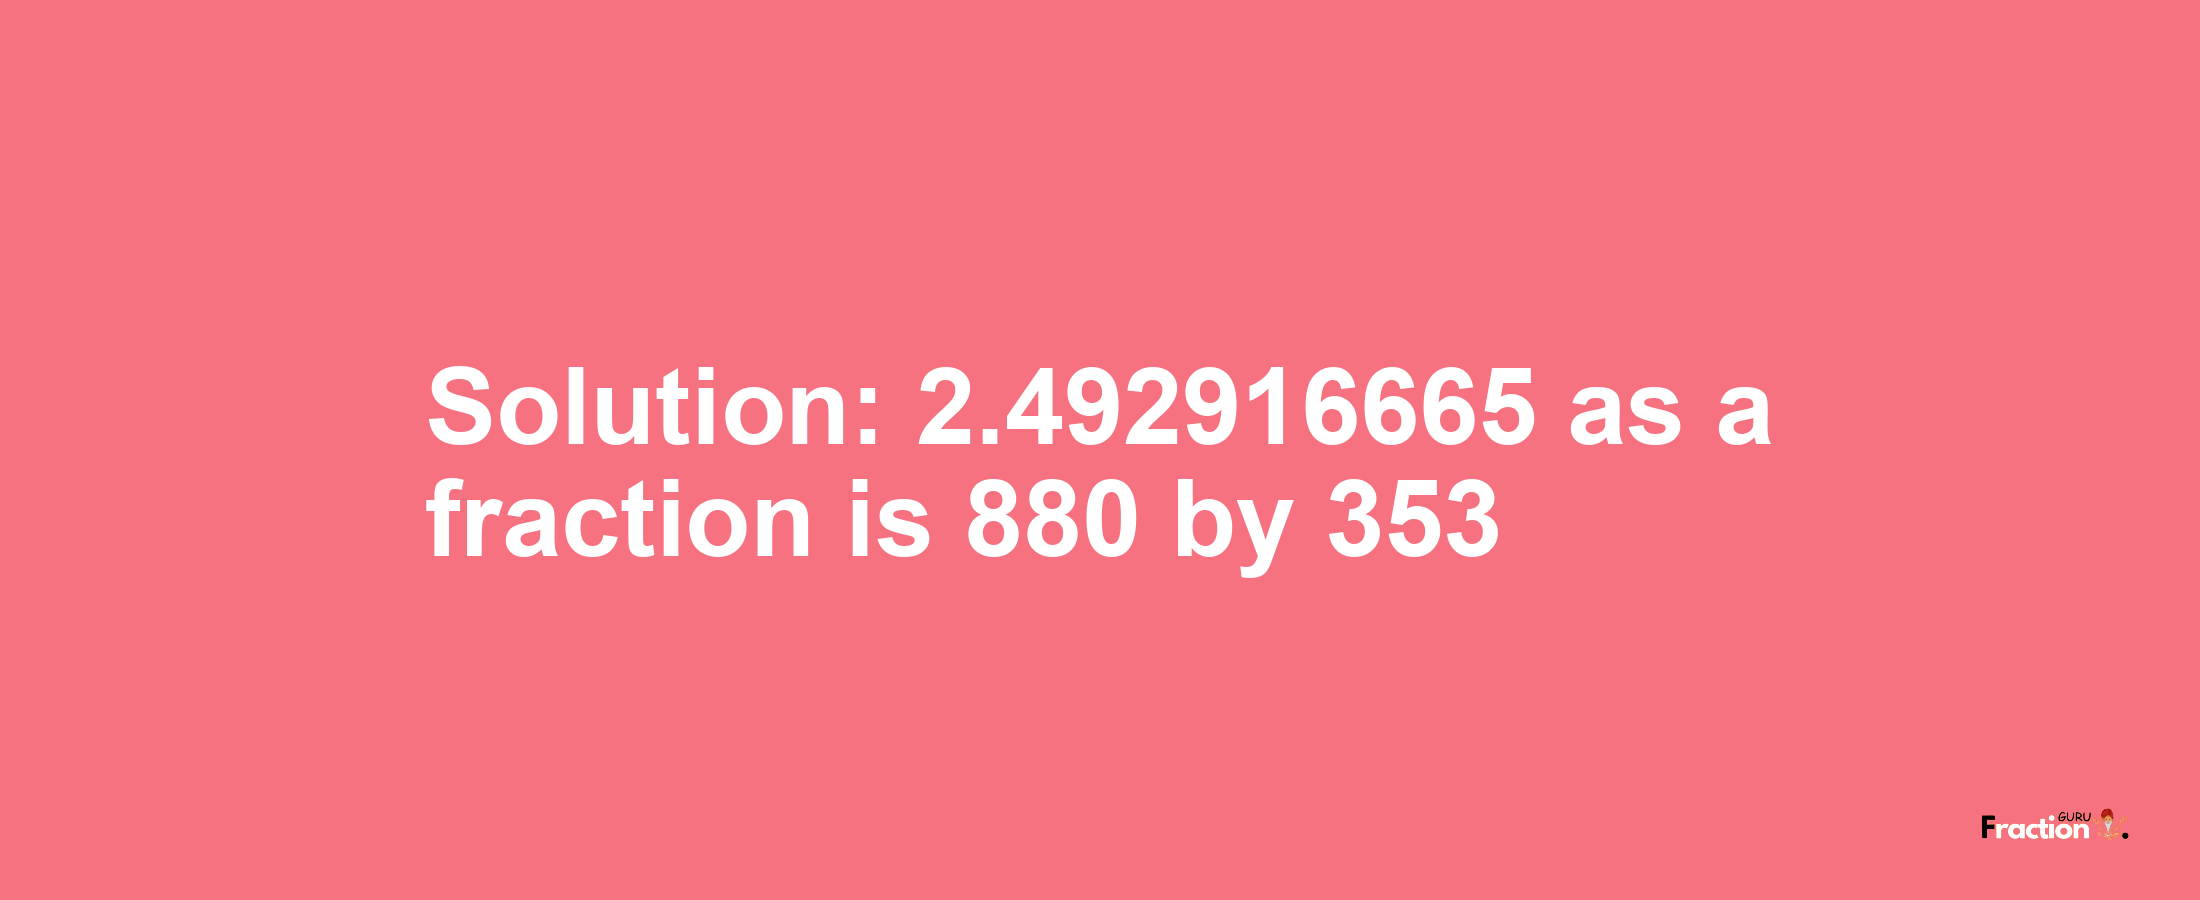 Solution:2.492916665 as a fraction is 880/353